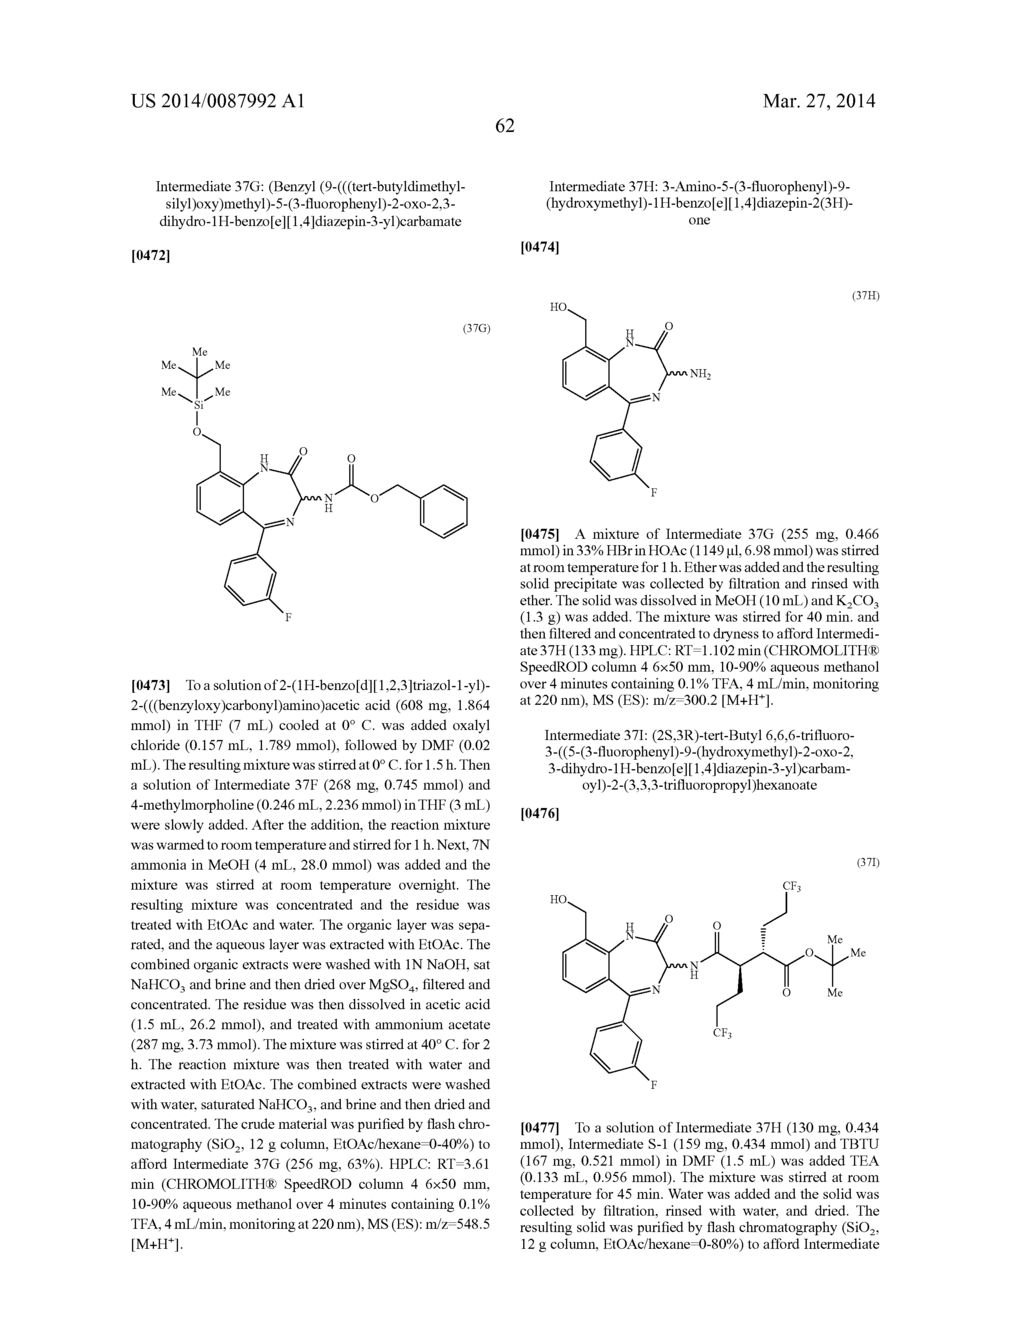 BIS(FLUOROALKYL)-1,4-BENZODIAZEPINONE COMPOUNDS AND PRODRUGS THEREOF - diagram, schematic, and image 69